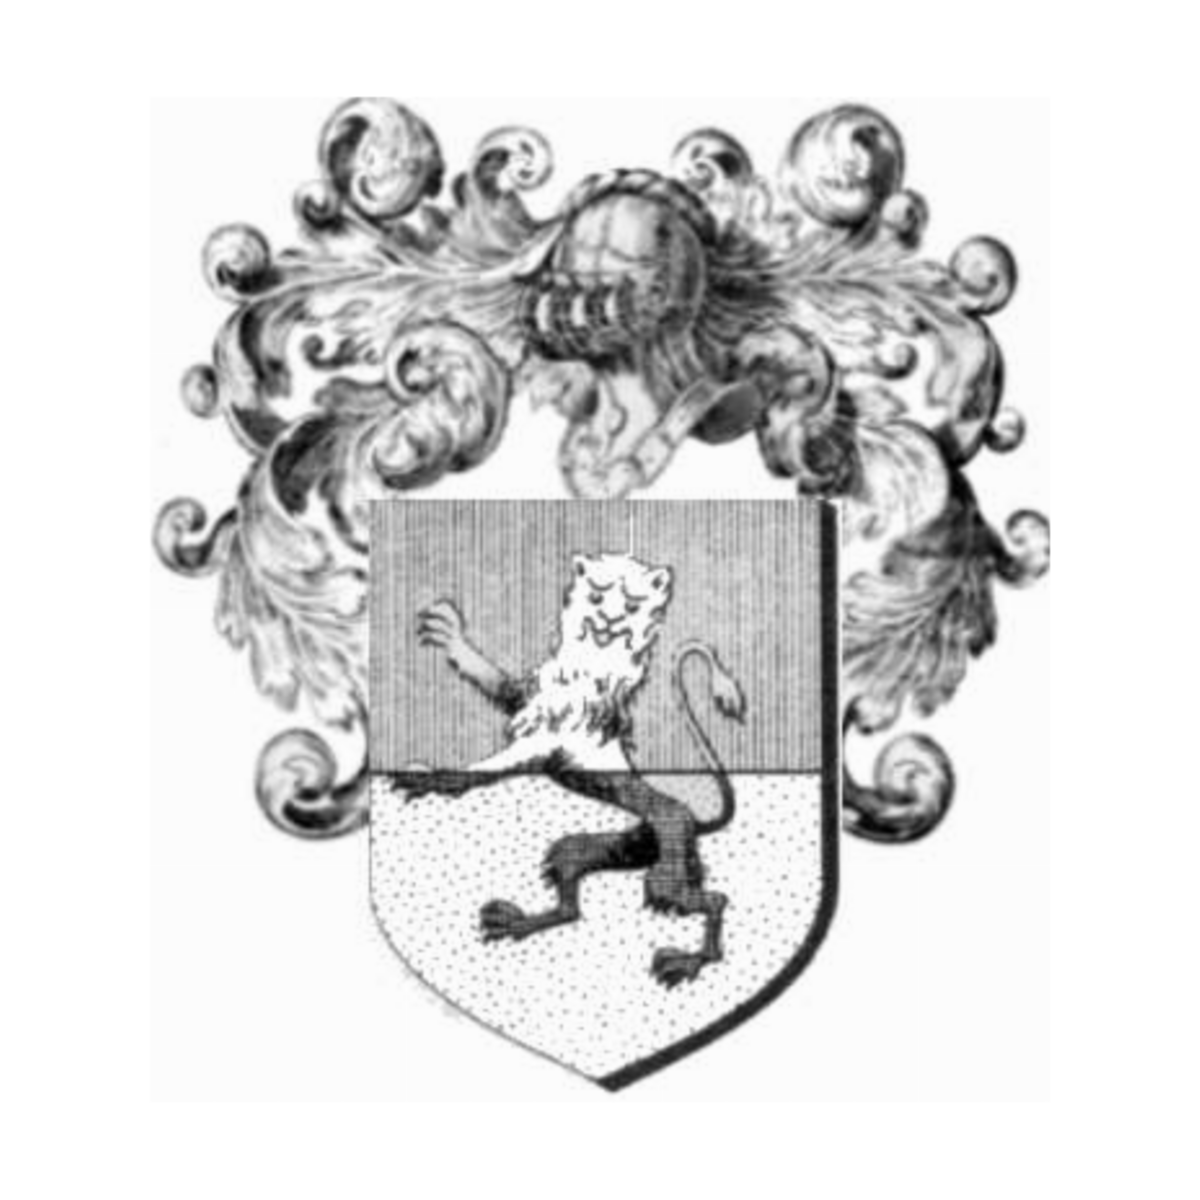 Coat of arms of family Bianco